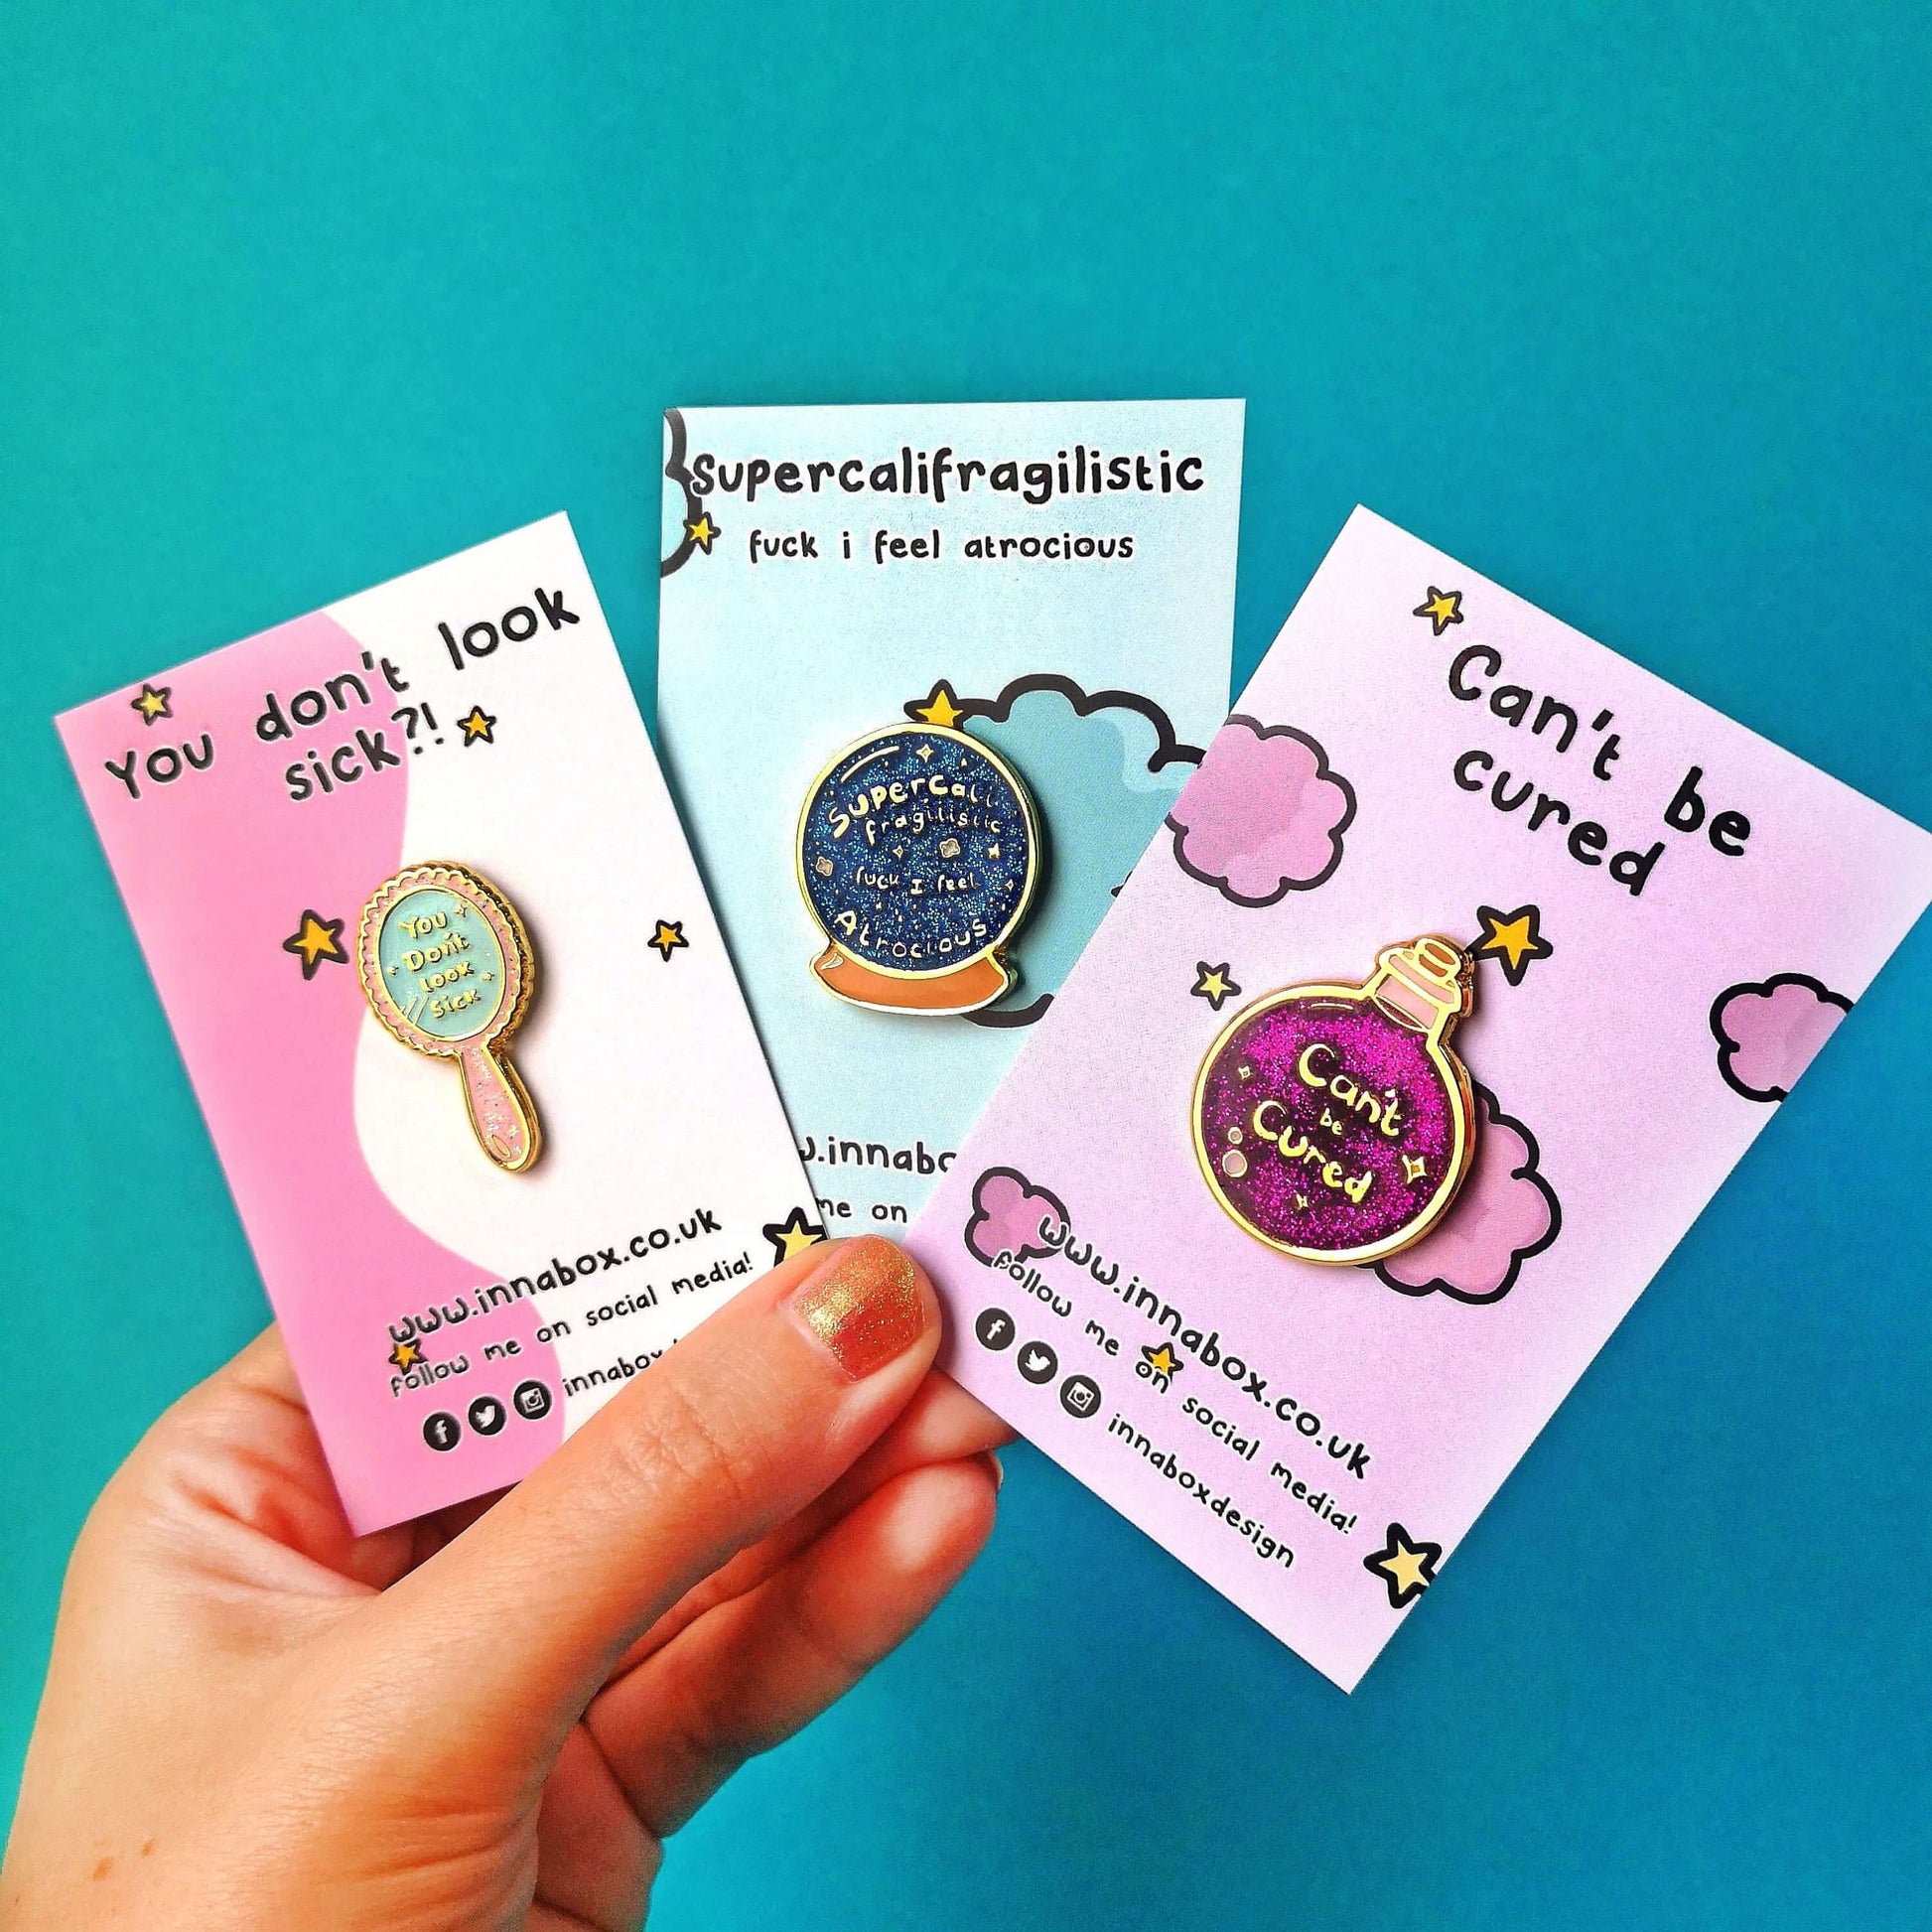 Three Innabox enamel pins shown on backing card held by a hand on a blue background. Choose from any three pins. Enamel pins designed to raise awareness for chronic illnesses